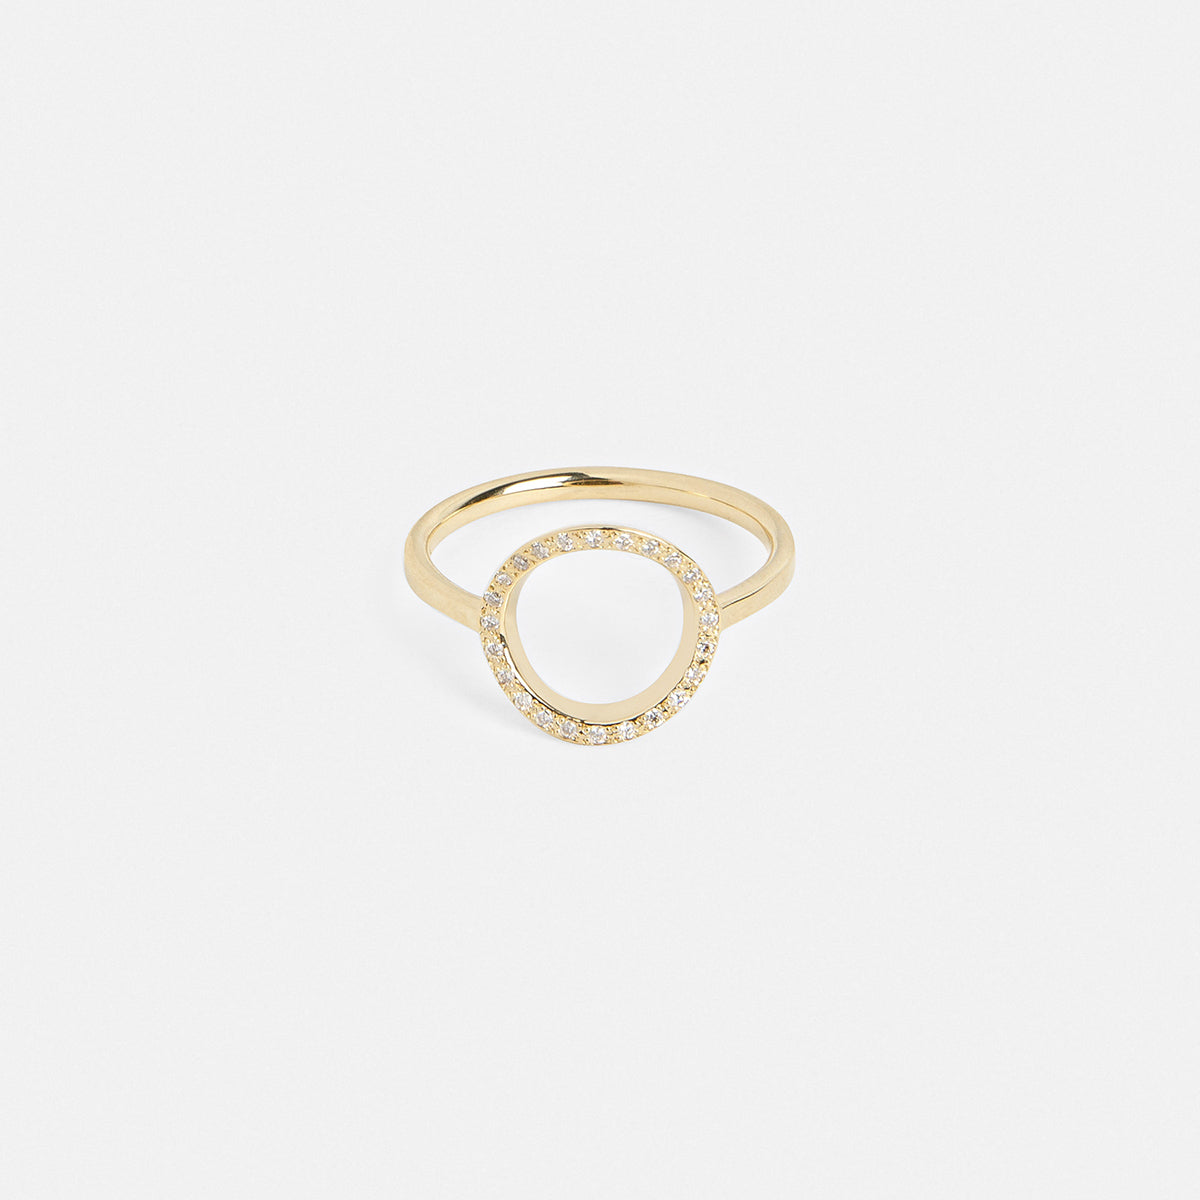 Nida Unconventional Ring in 14k Gold set with White Diamonds by SHW Fine Jewelry